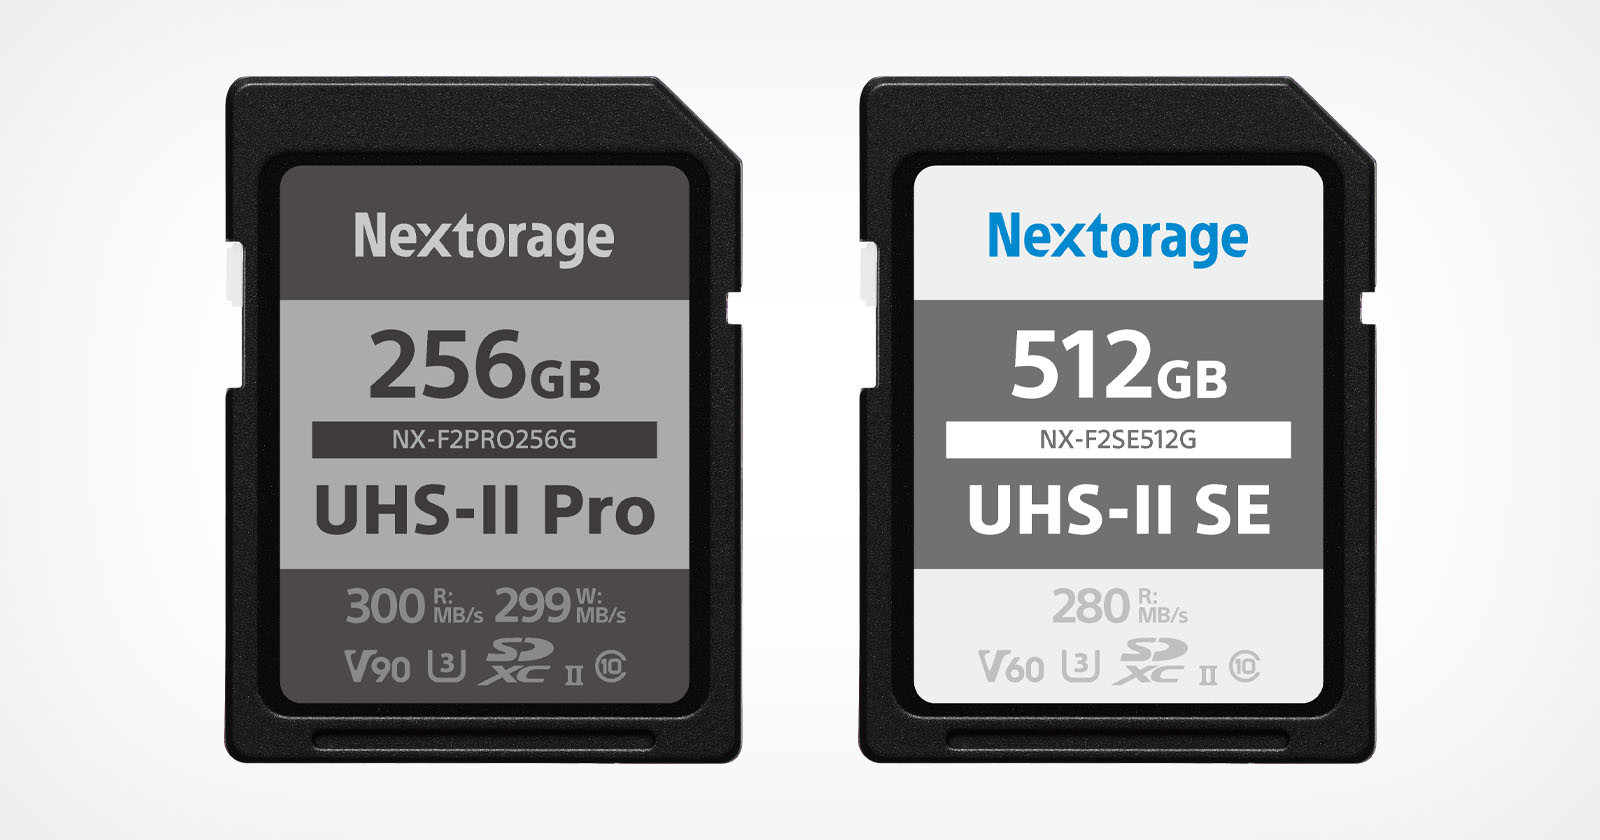  nextorage launches series high-performance cards 